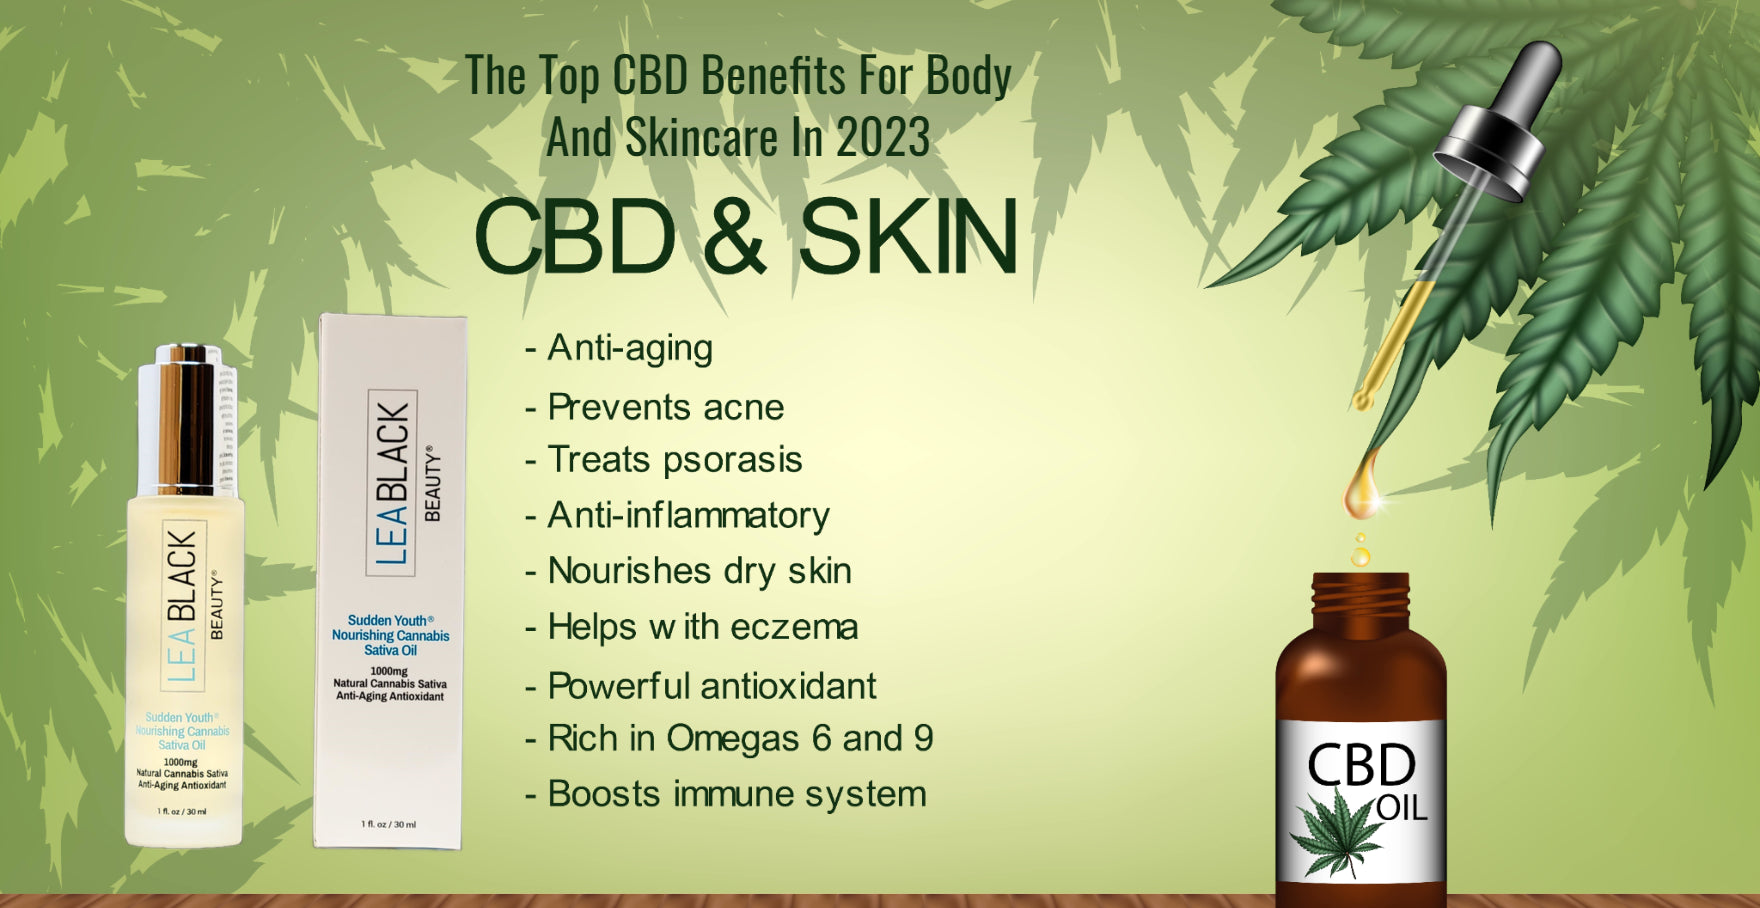 The Top CBD Benefits For Body And Skincare In 2023